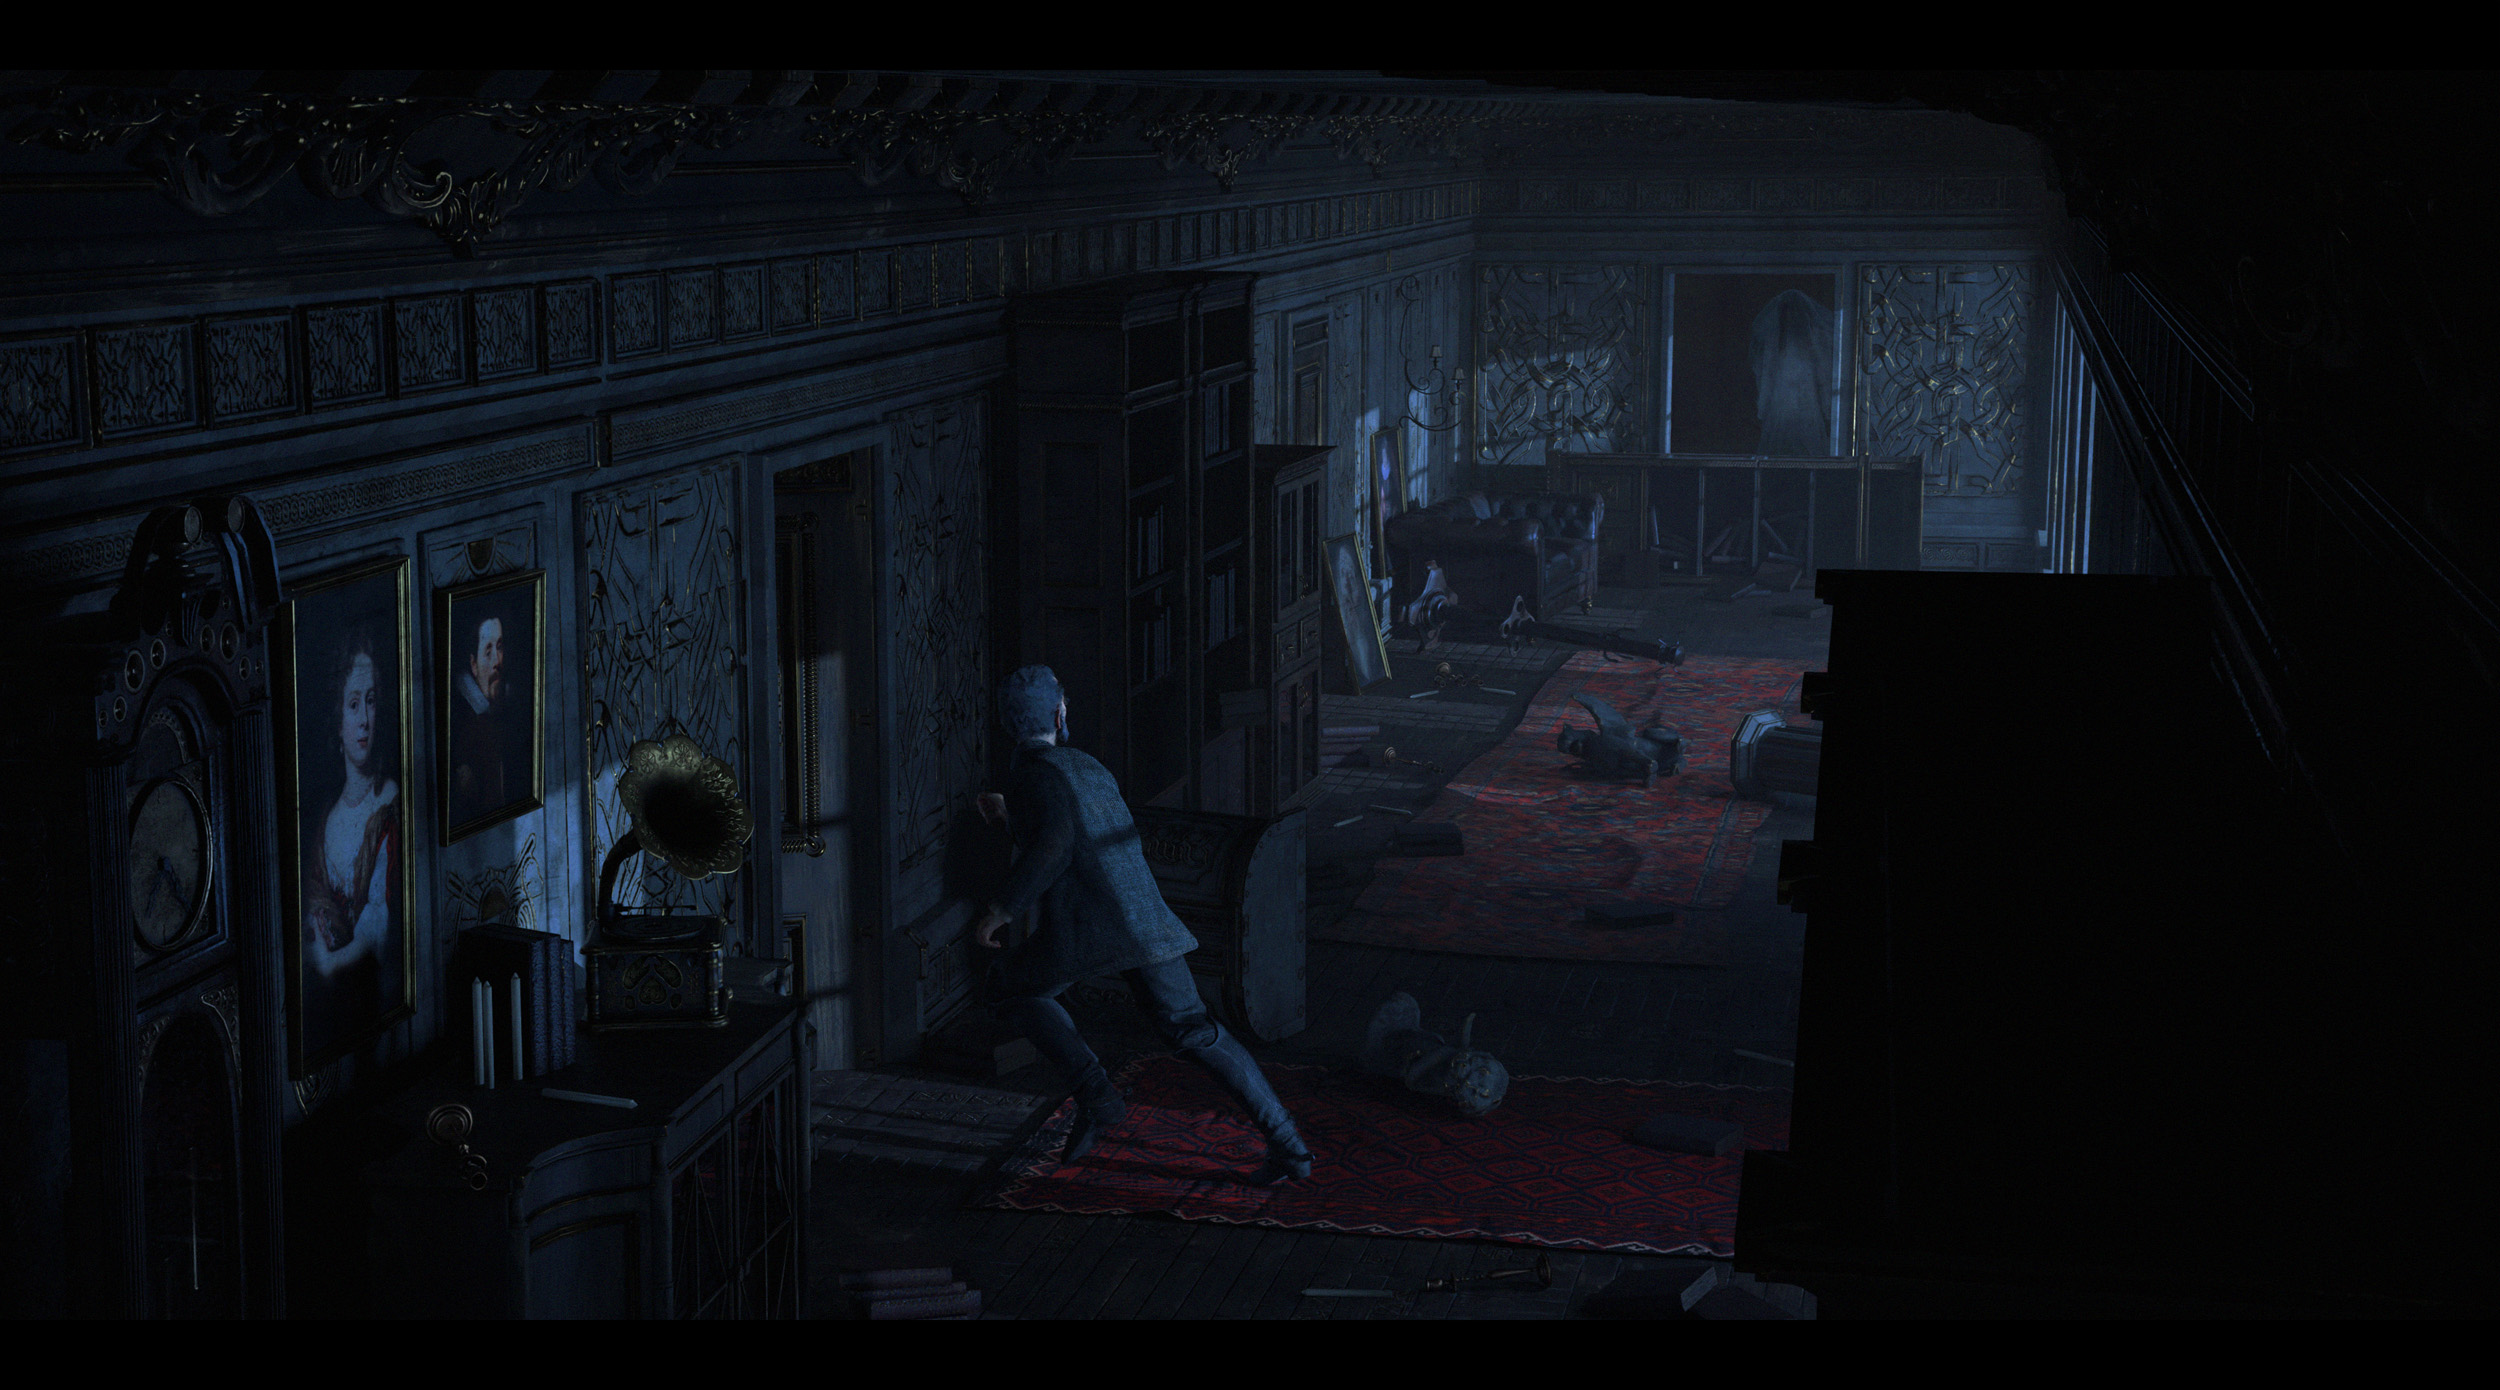 Digital illustration of a chase scene showing the main character running away from an evil spirit in a mansion hallway.